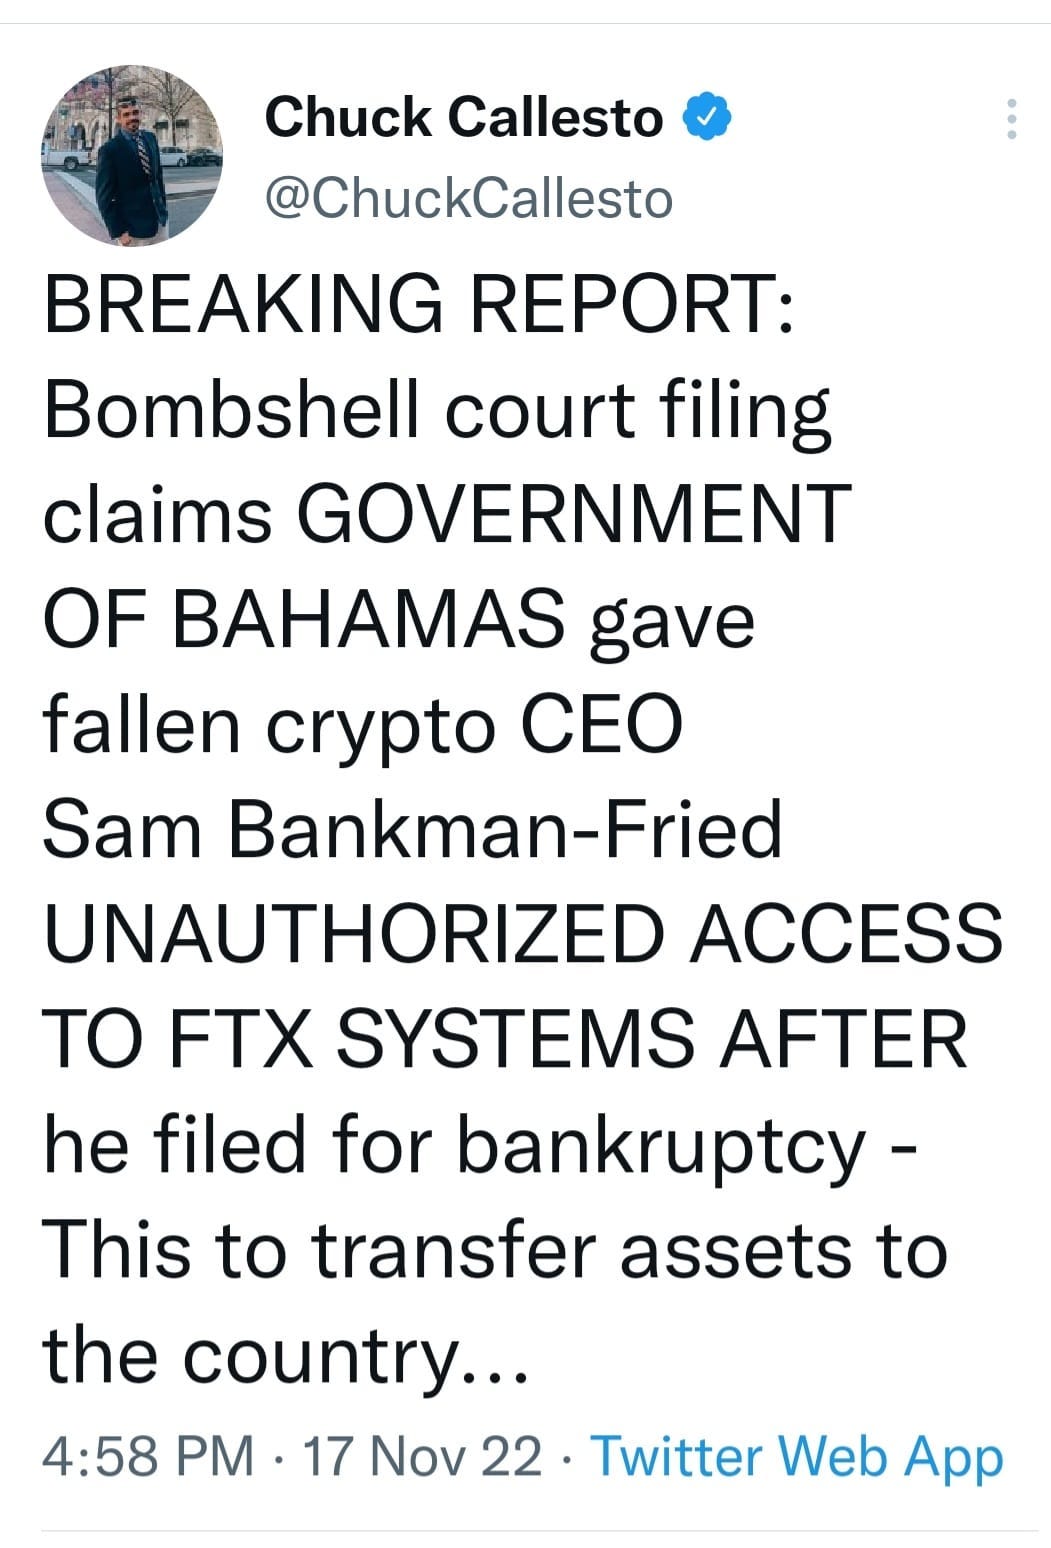 May be an image of 1 person and text that says 'Chuck Callesto @ChuckCallesto BREAKING REPORT: Bombshell court filing claims GOVERNMENT OF BAHAMAS gave fallen crypto CEO Sam Bankman-Fried UNAUTHORIZED ACCESS TO FTX SYSTEMS AFTER he filed for bankruptcy- This to transfer assets to the country... 4:58 PM 17 Nov 22 Twitter Web App'